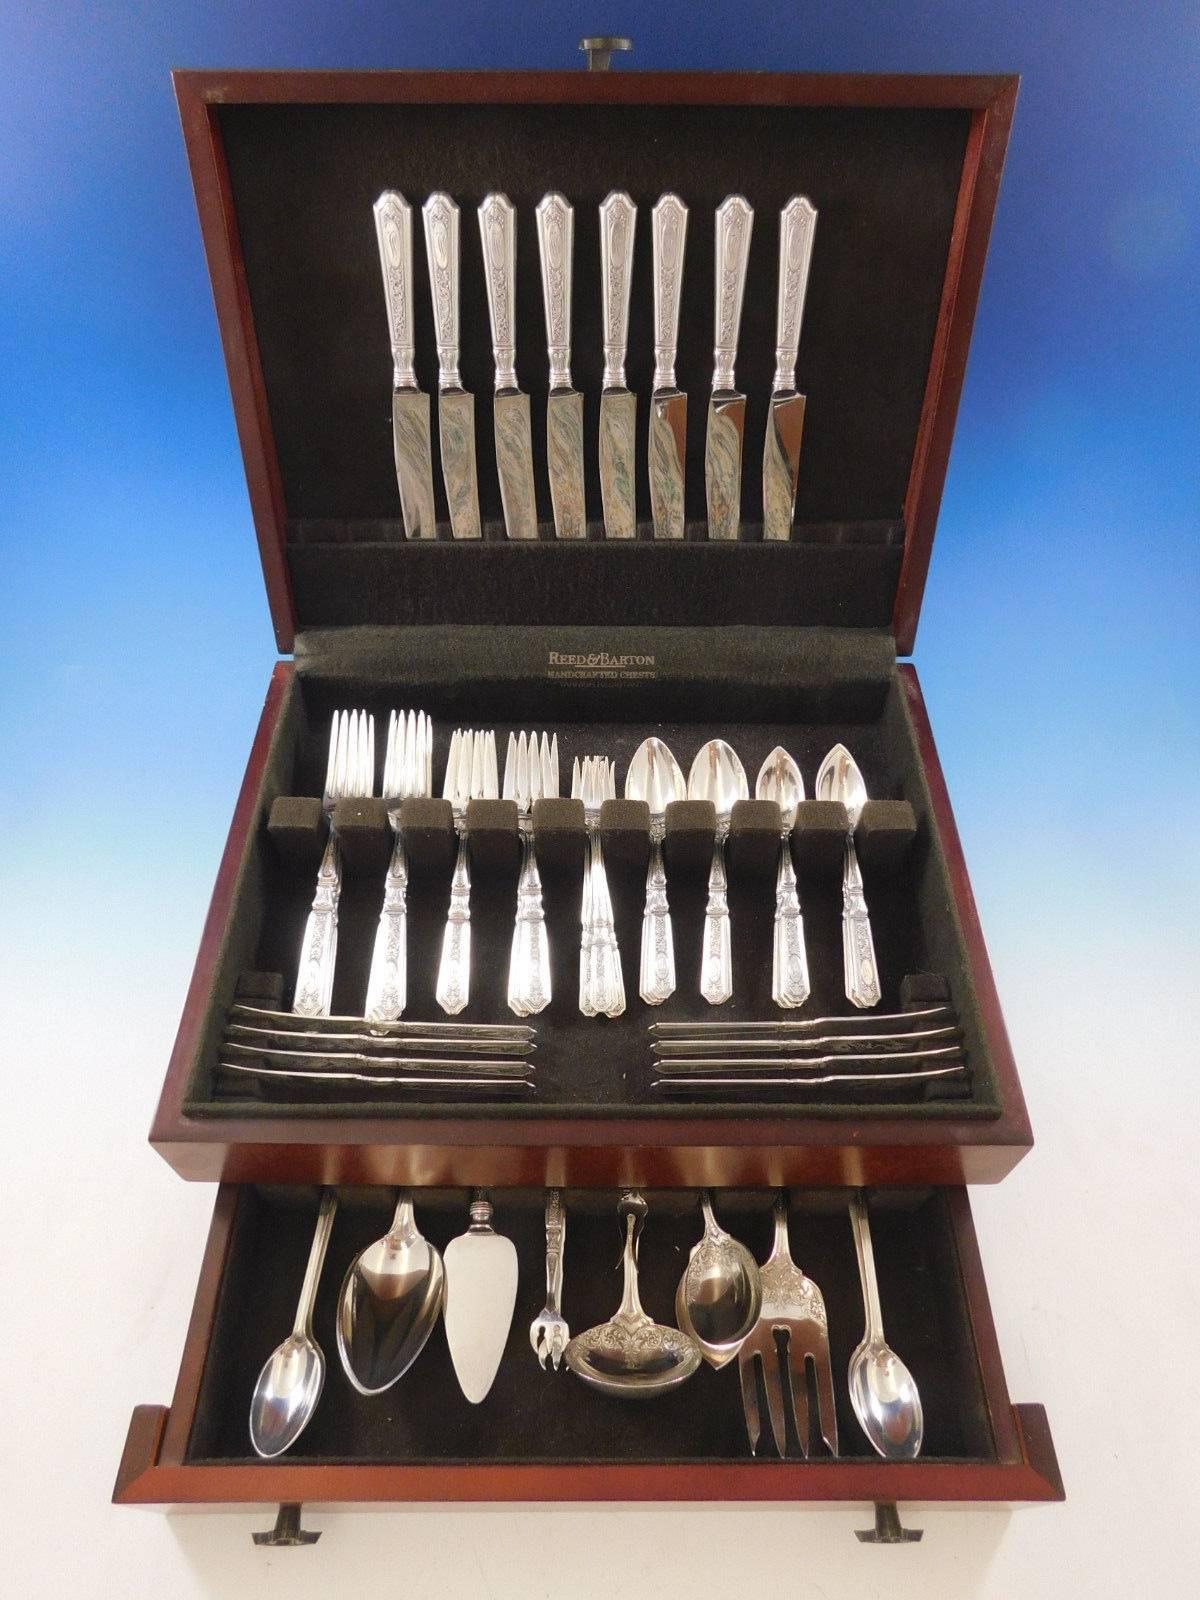 Stunning Saint Dunstan Chased by Gorham sterling silver Flatware set, 73 pieces. This set includes:

8 Knives, 9 1/4